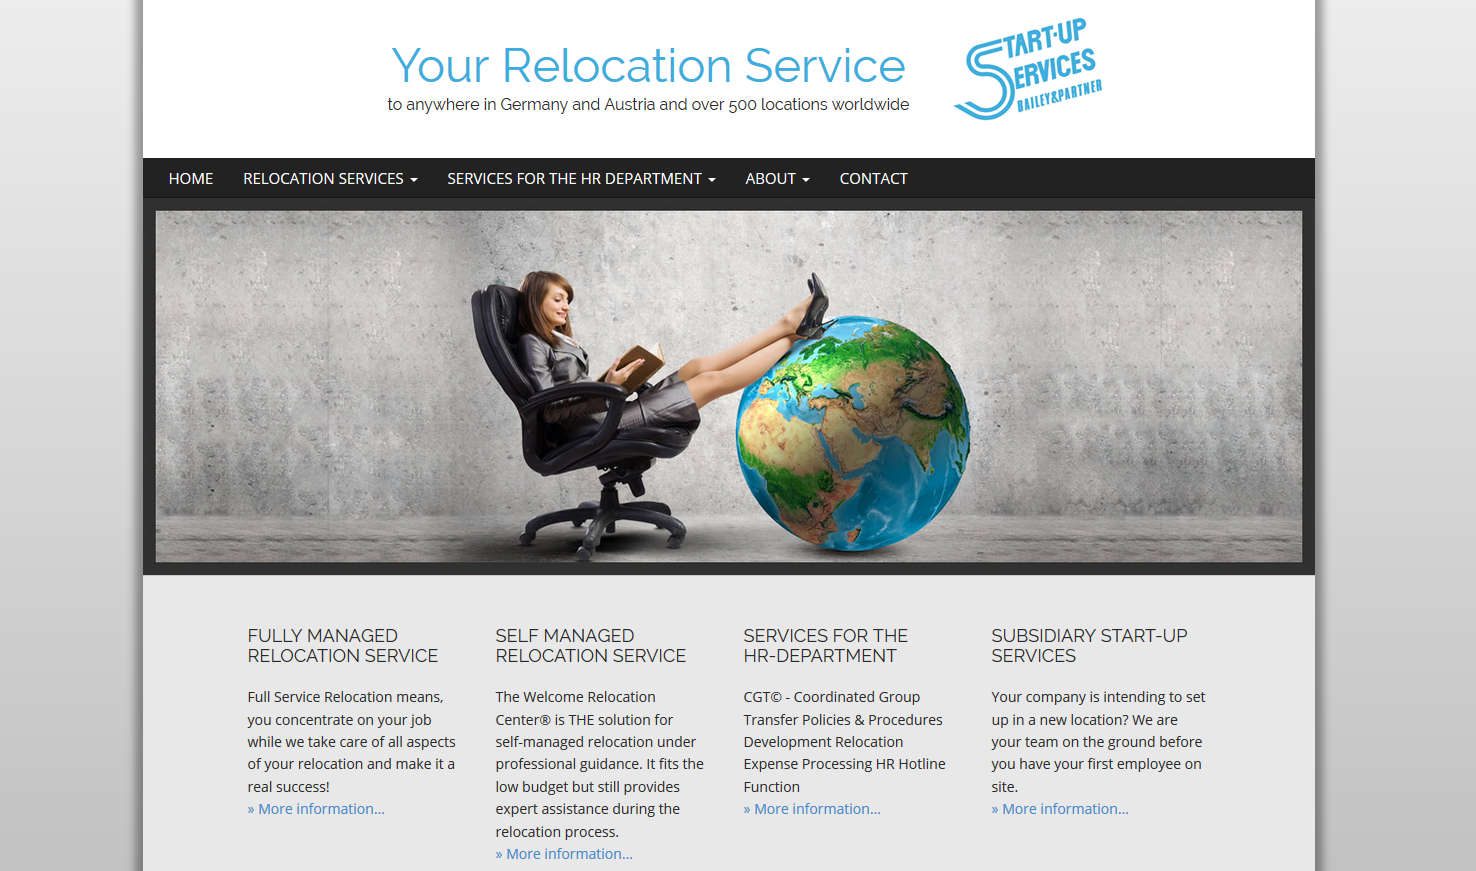 Homepage Start-Up Servies your relocation service